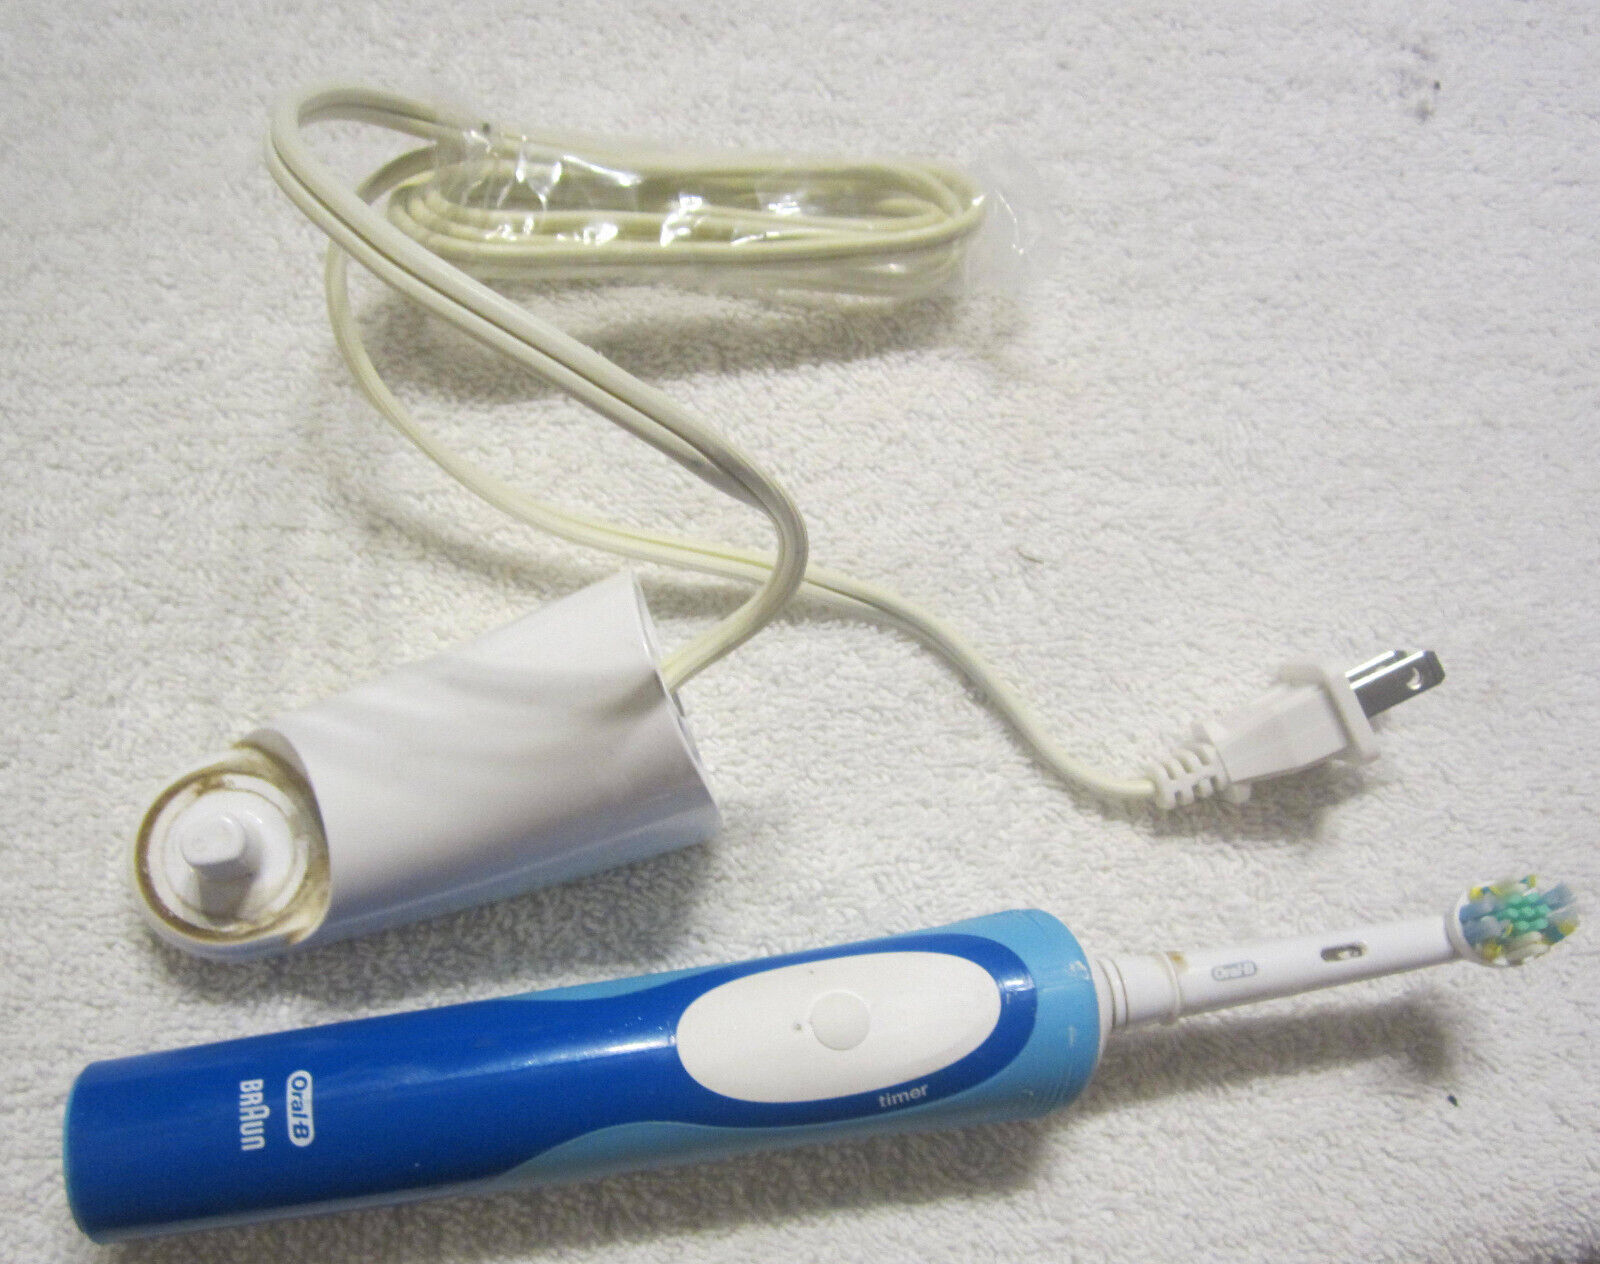 709 oral b braun electric toothbrush type 3,charger and brush,charges and works